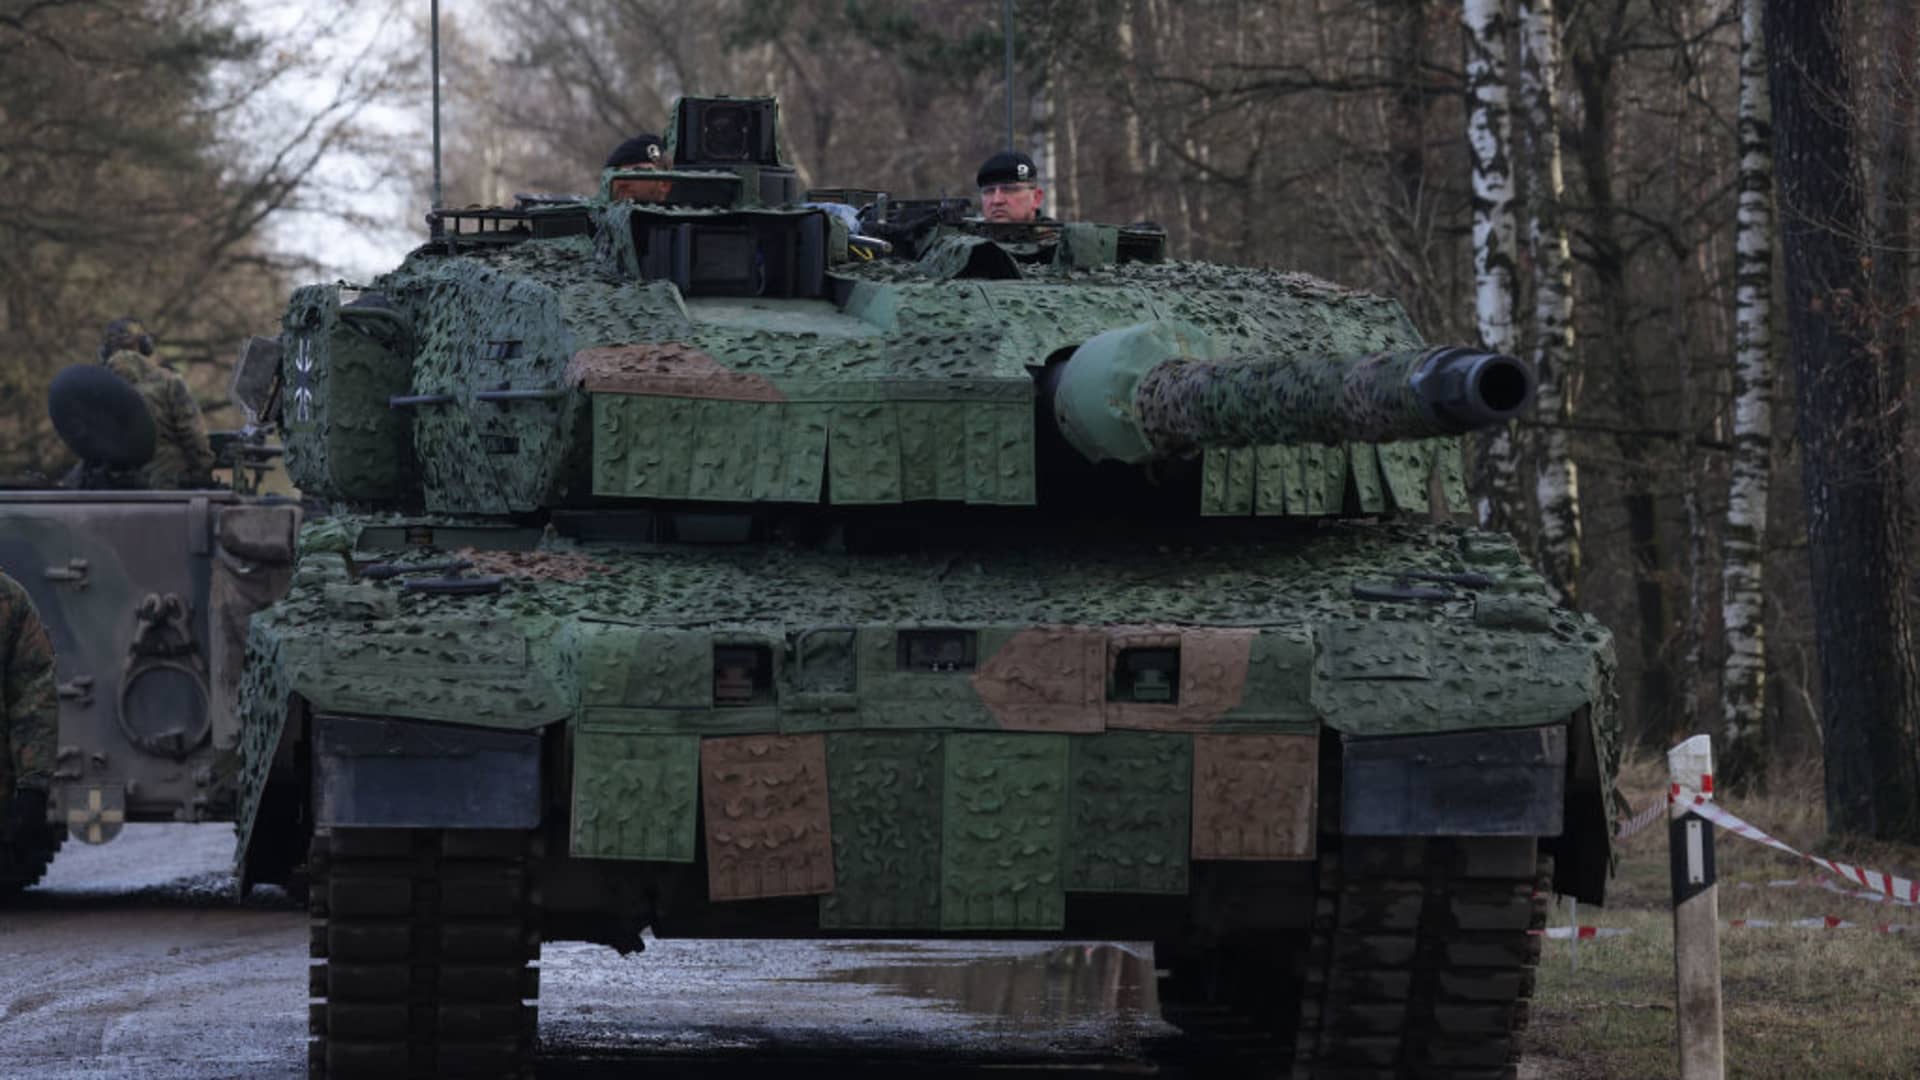 A new Leopard 2 A7V heavy battle tank, the most advanced version of the German-made tank.